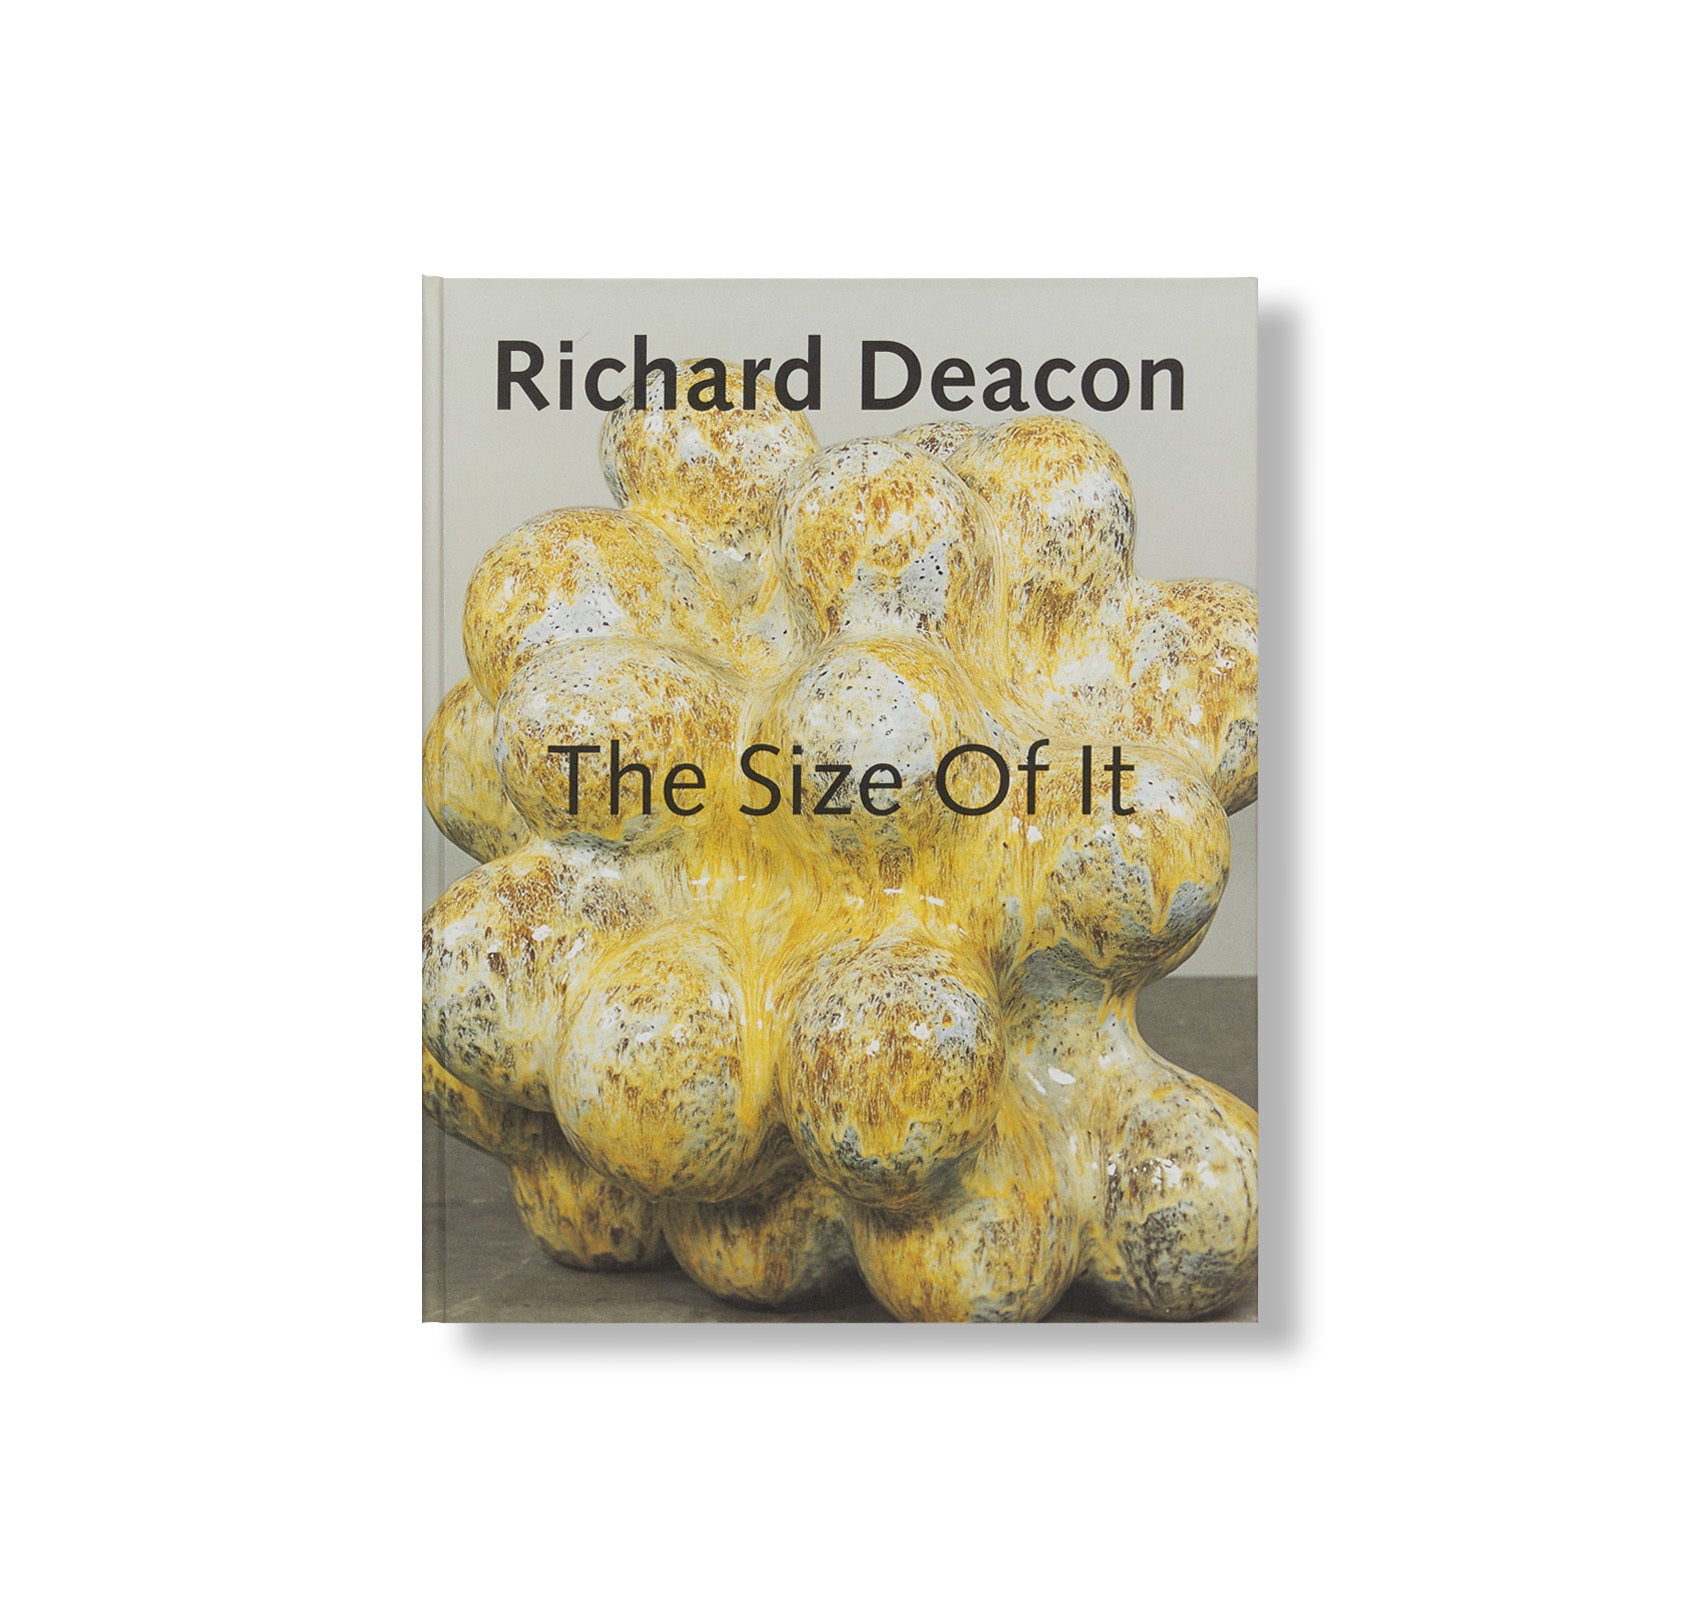 THE SIZE OF IT by Richard Deacon